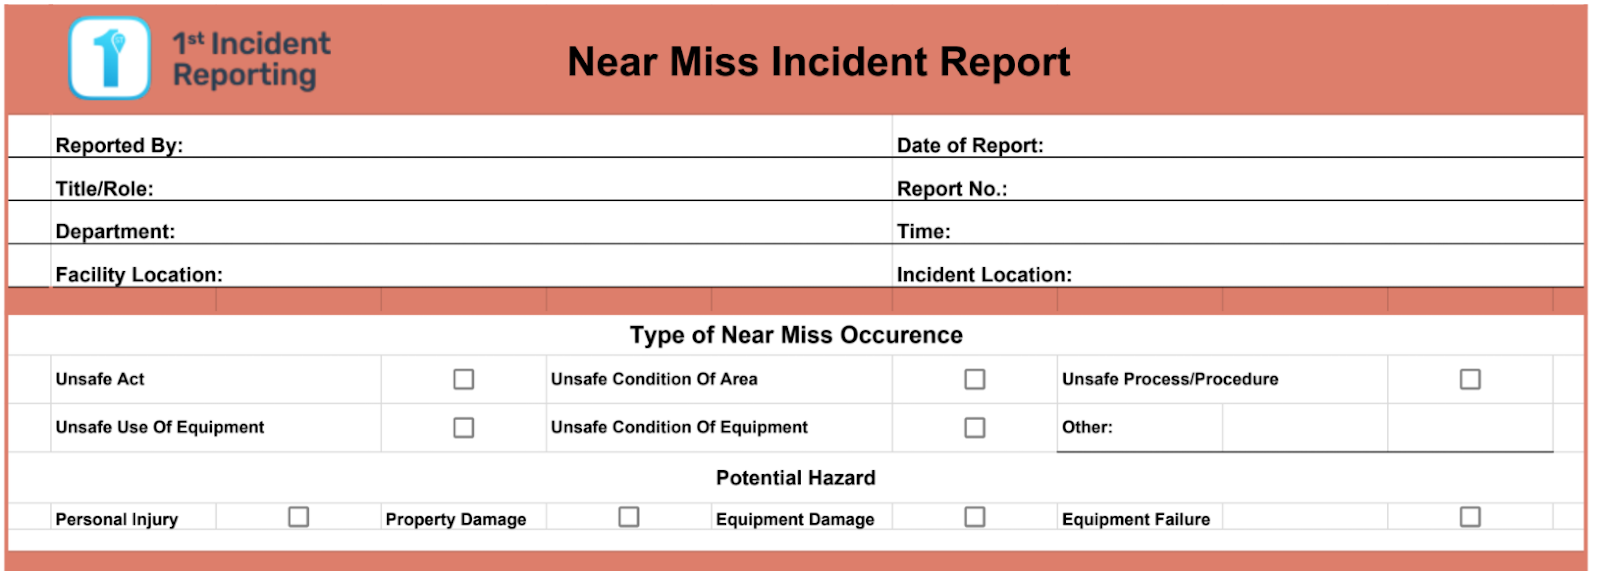 How To Write An Incident Report